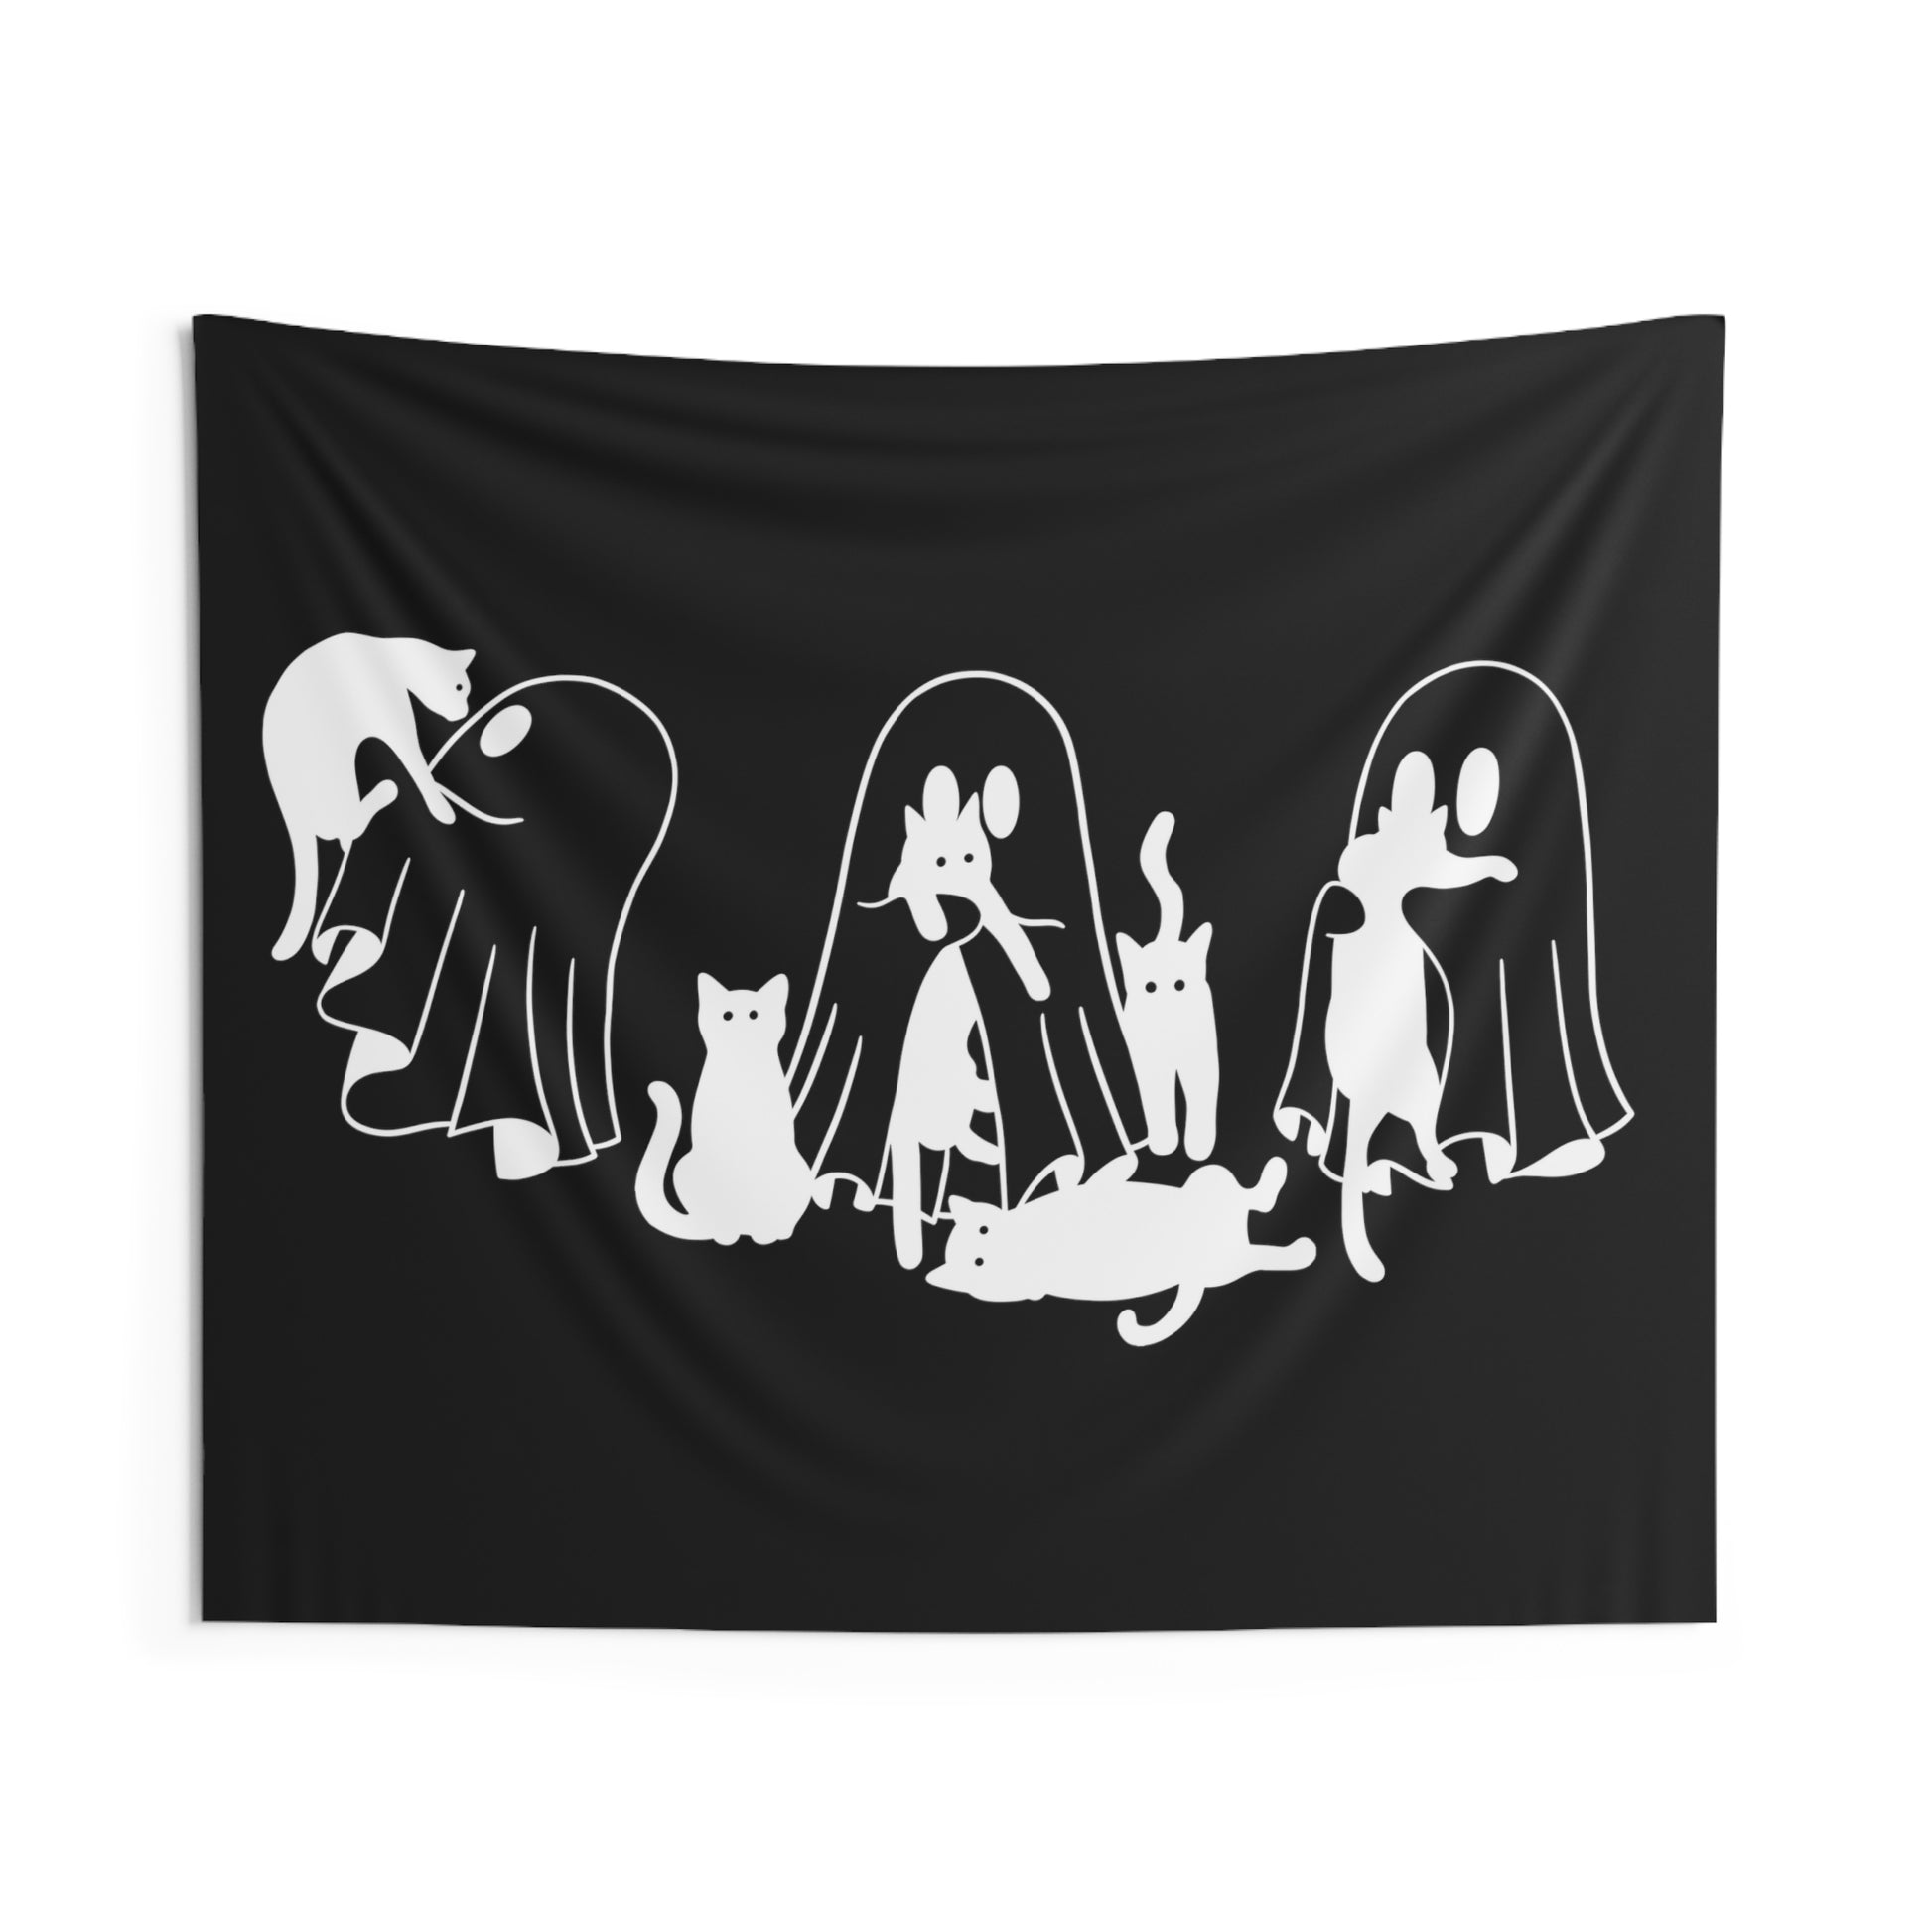 Cats and Ghost Indoor Wall Tapestries, Cat Halloween Tapestry, Spooky season room decor, Cute magical Home decor, Funny Halloween decor